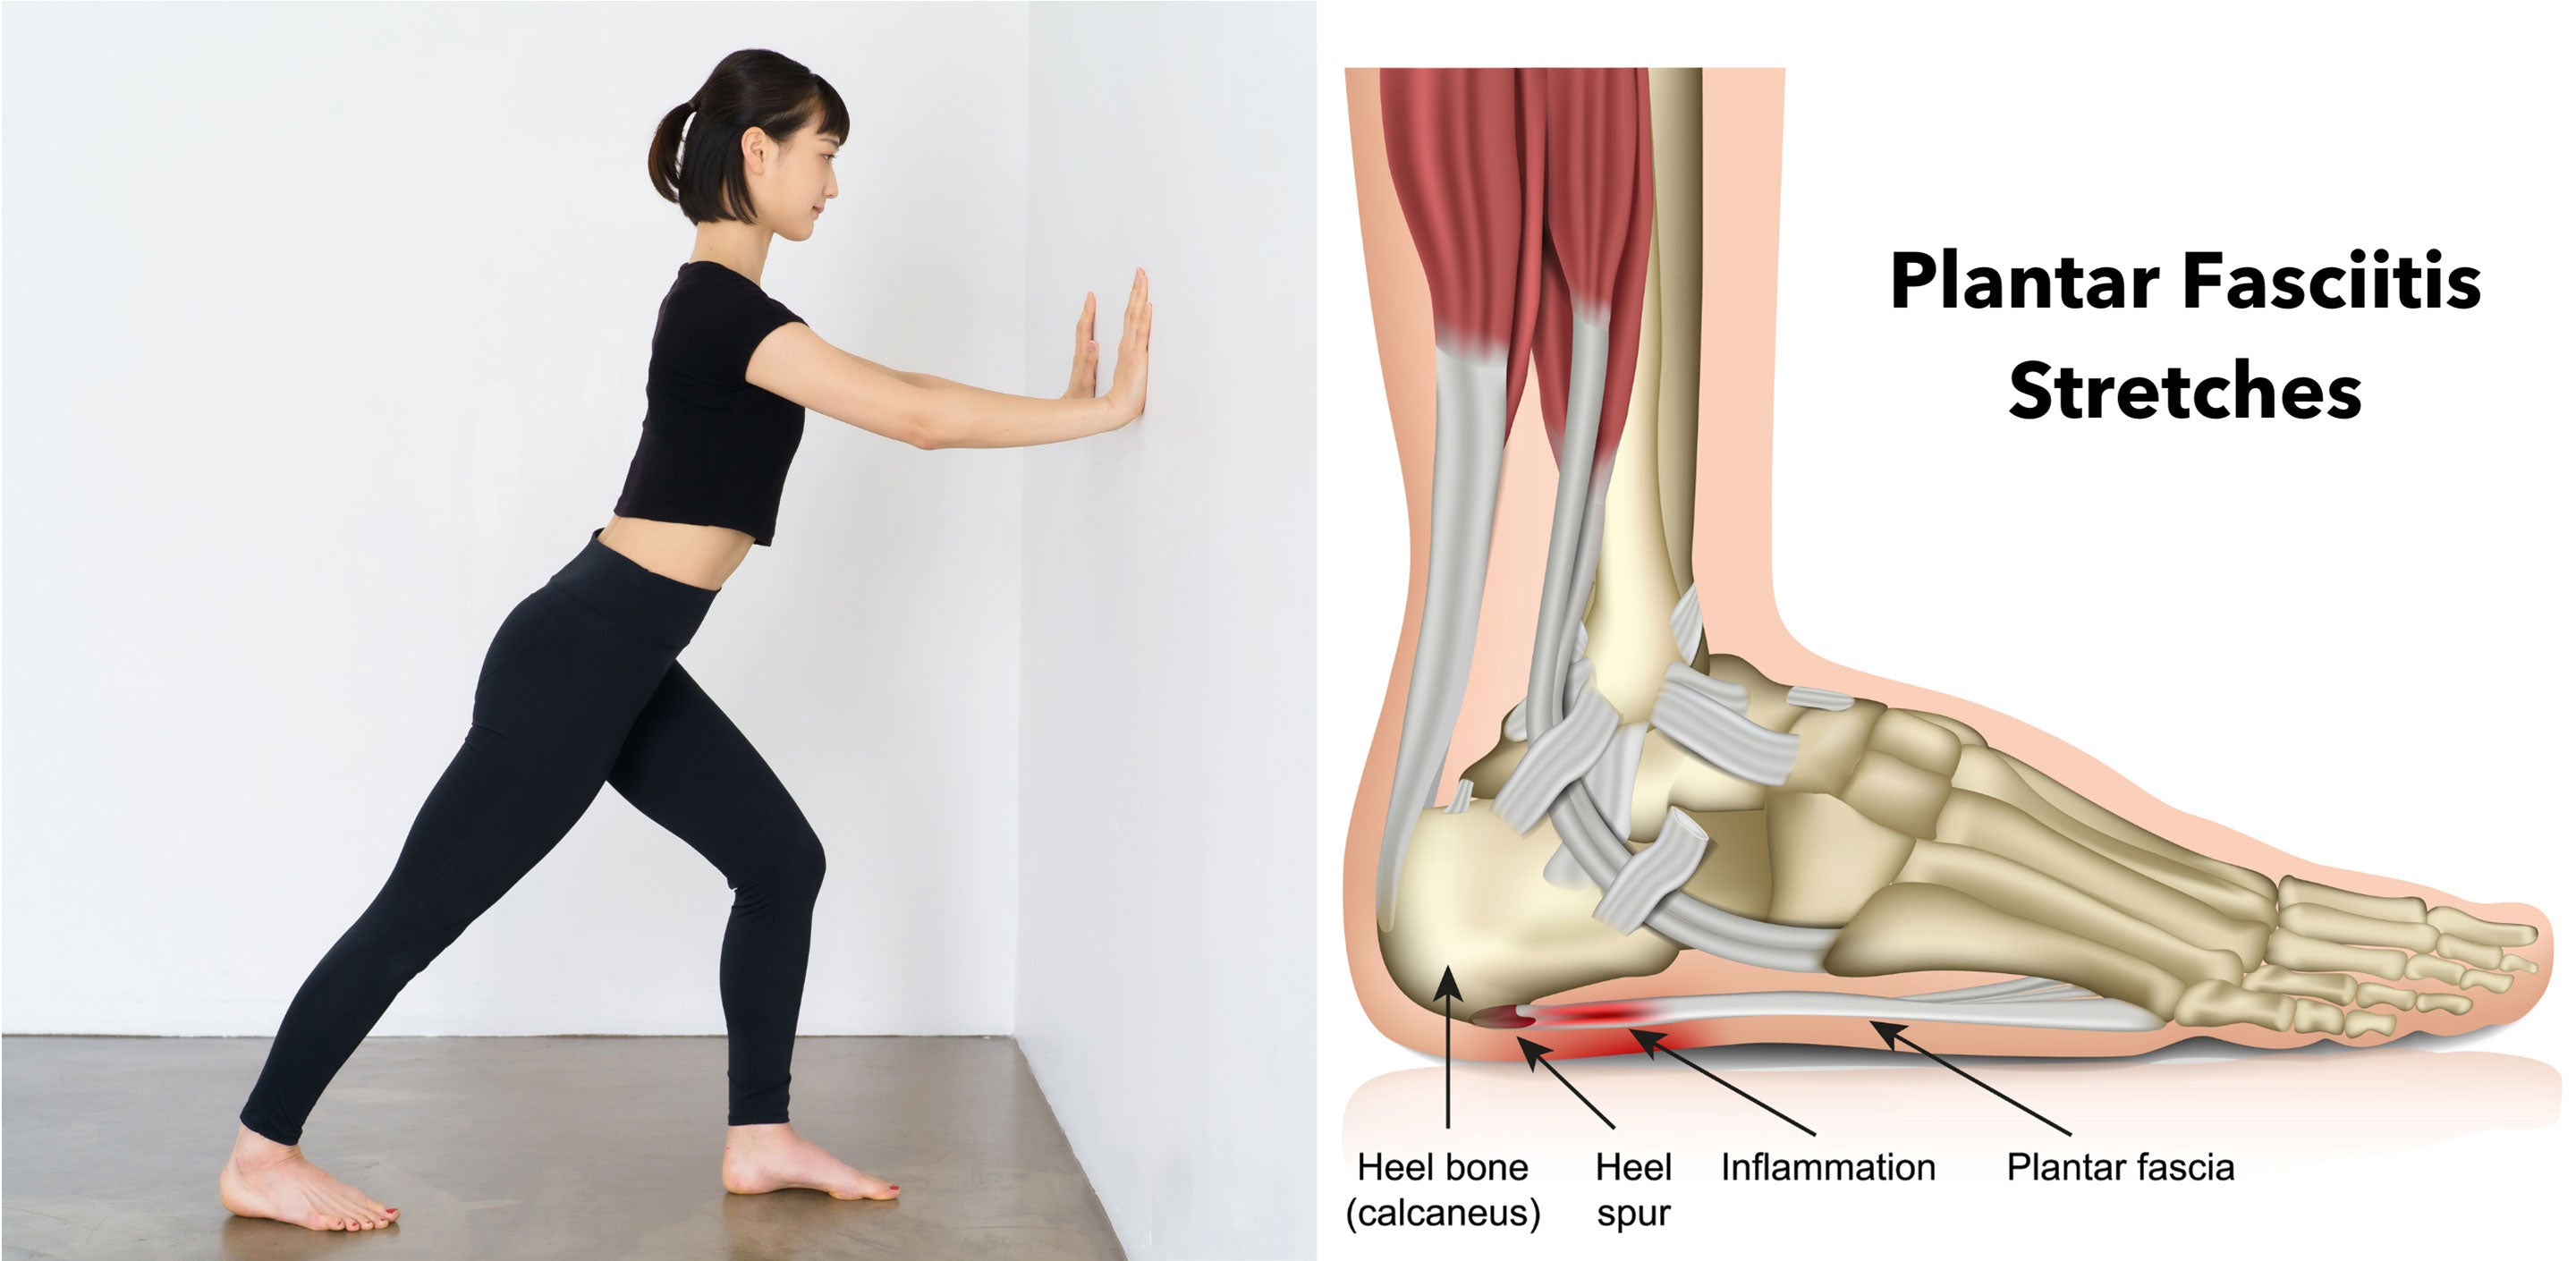 Plantar fascia – specific stretching exercise 2: Heel is hold on